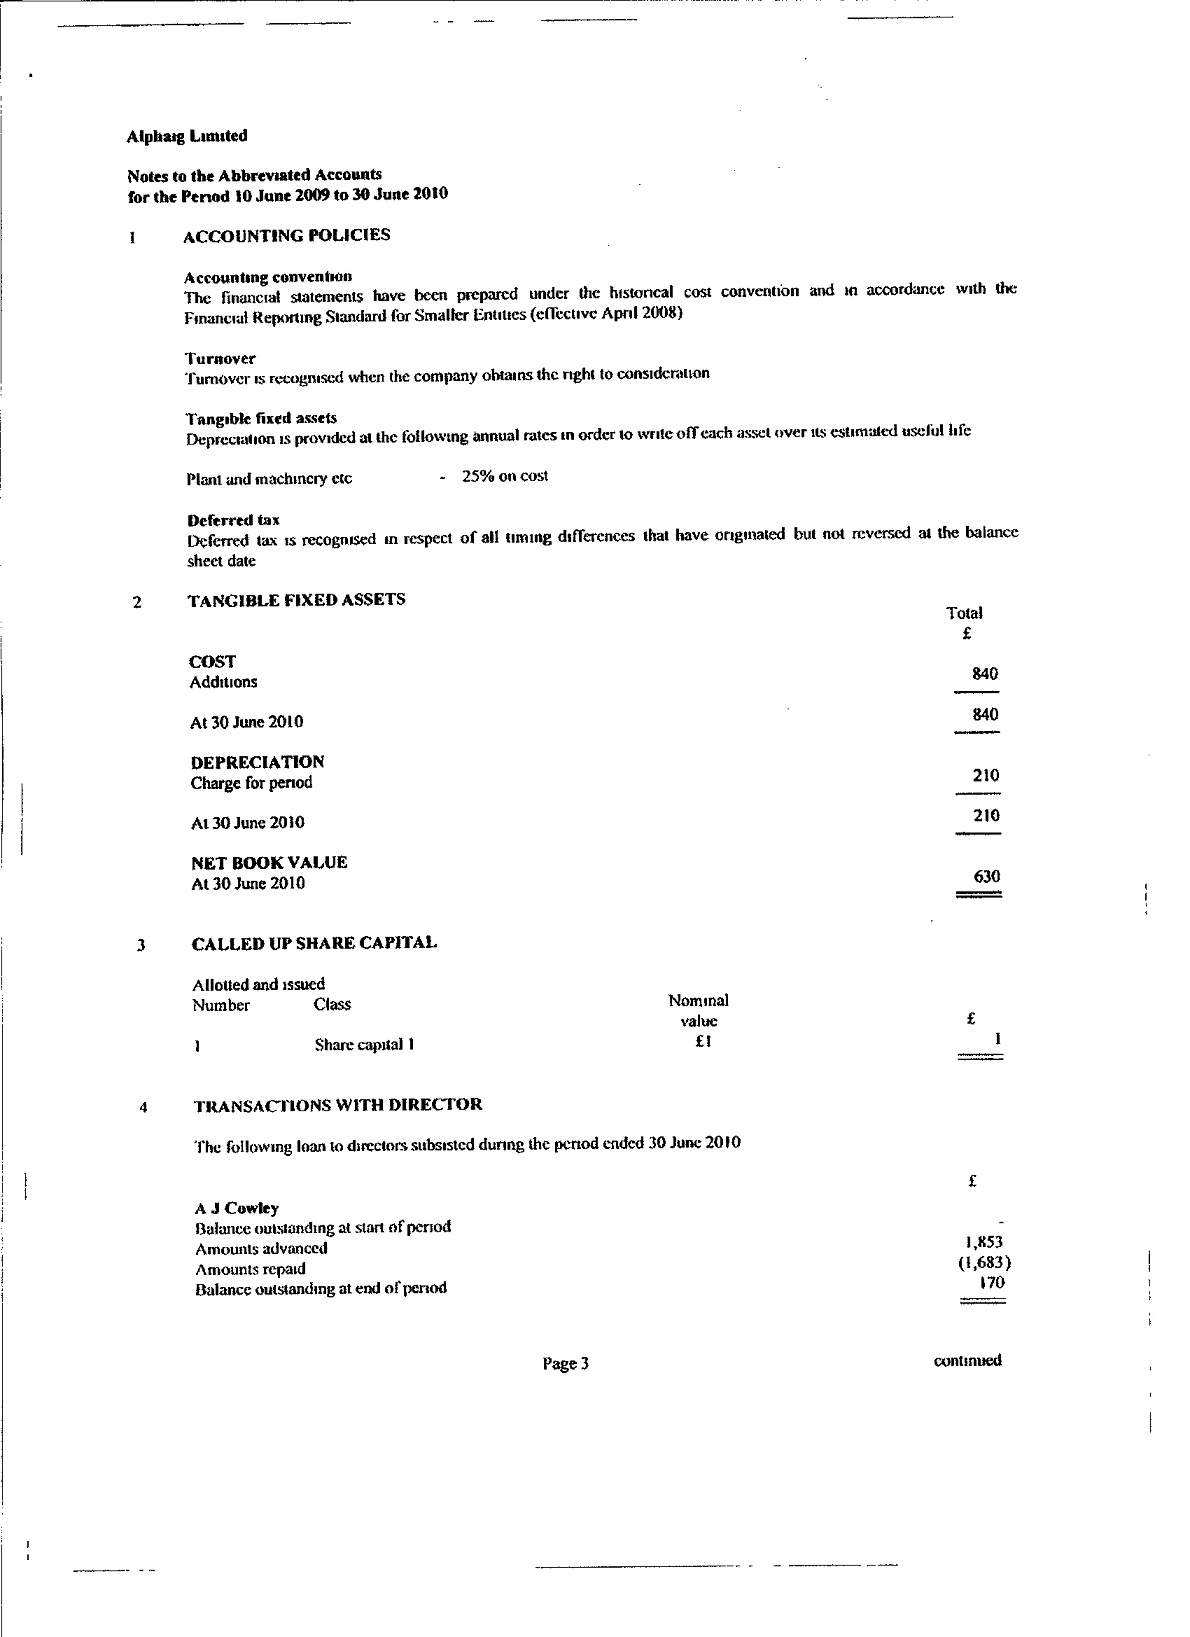 Alphaig Limited Accounts, page 3